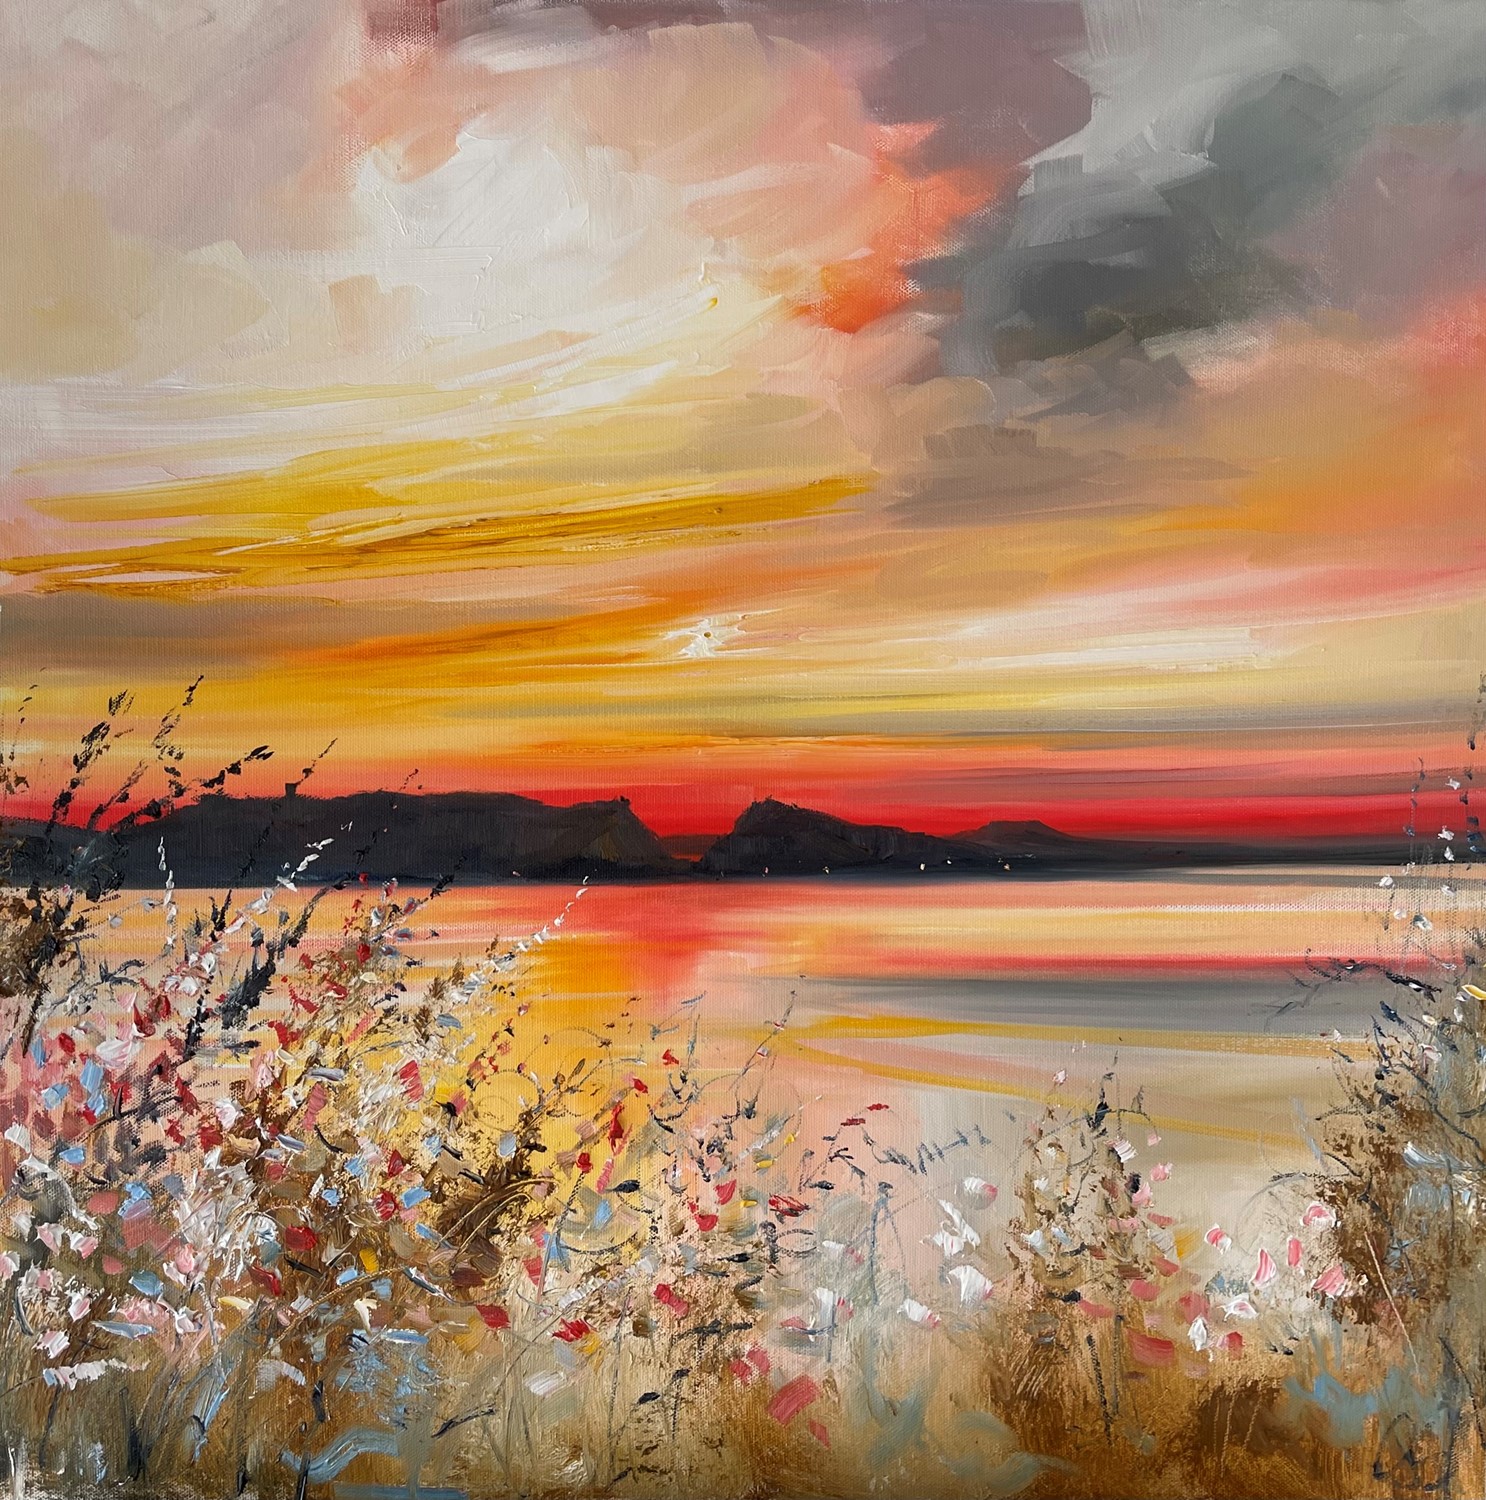 'Sunset flanked by wildflowers' by artist Rosanne Barr